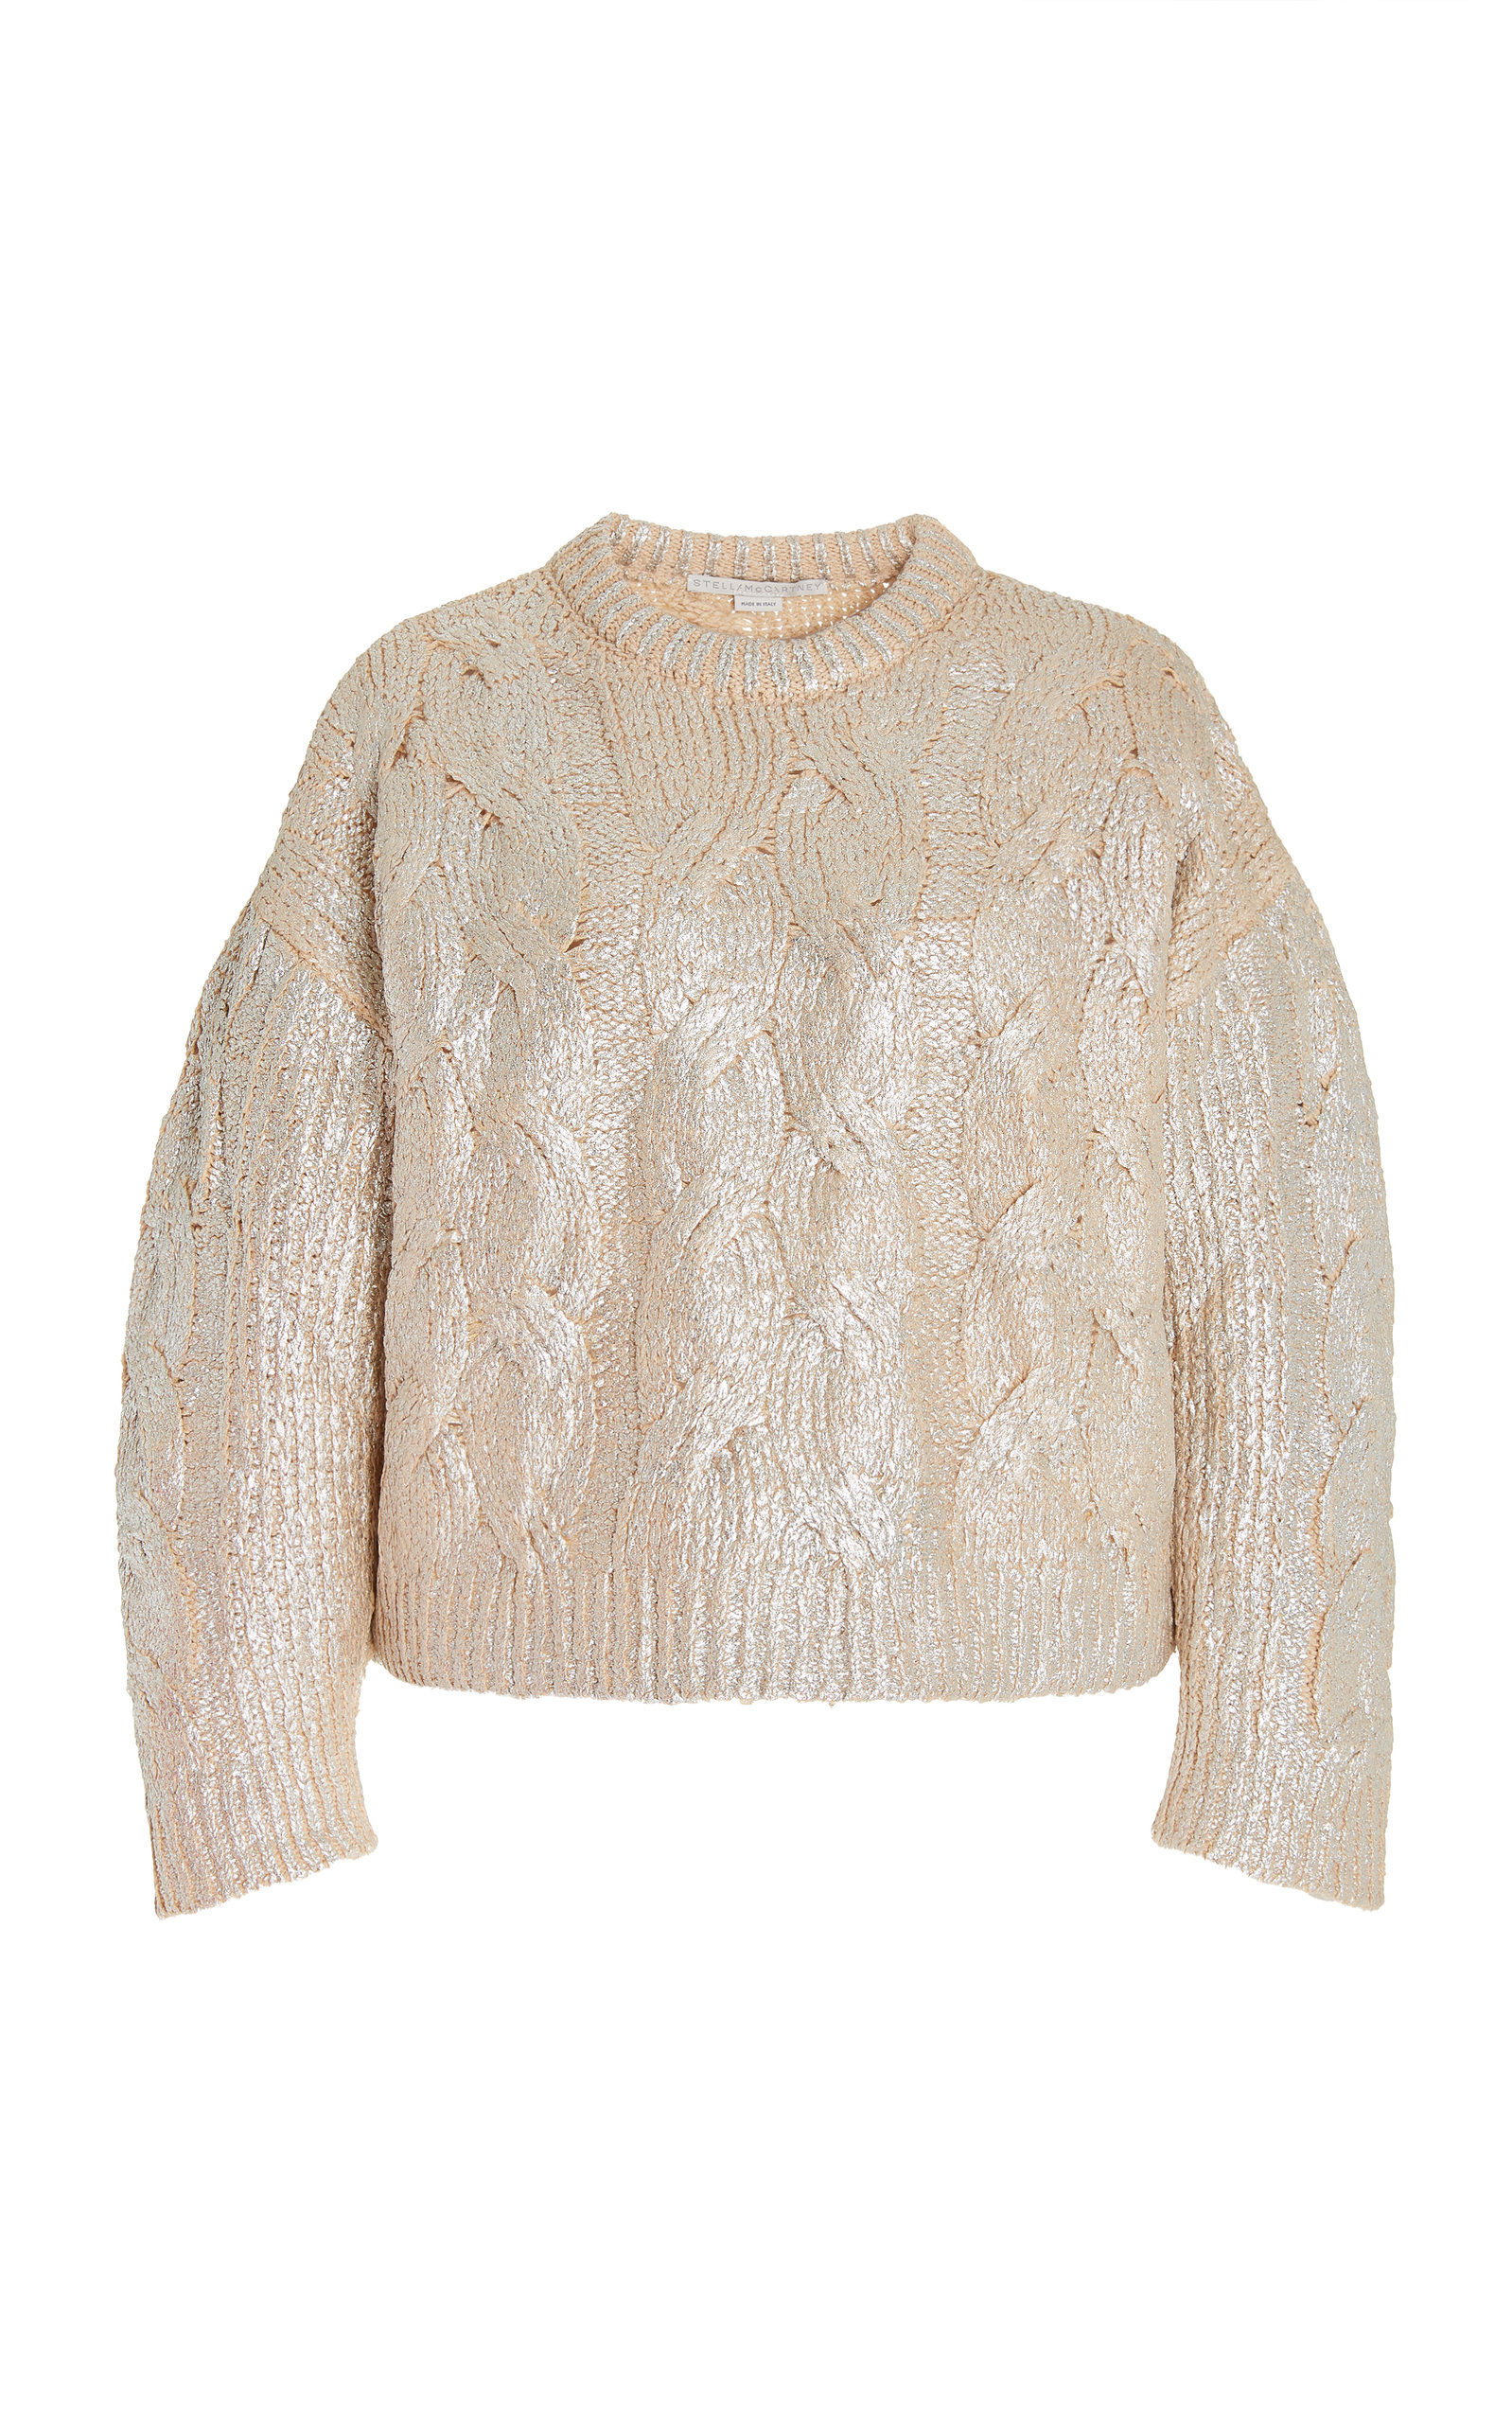 Stella McCartney Women's Foiled Cable-Knit Cotton Sweater